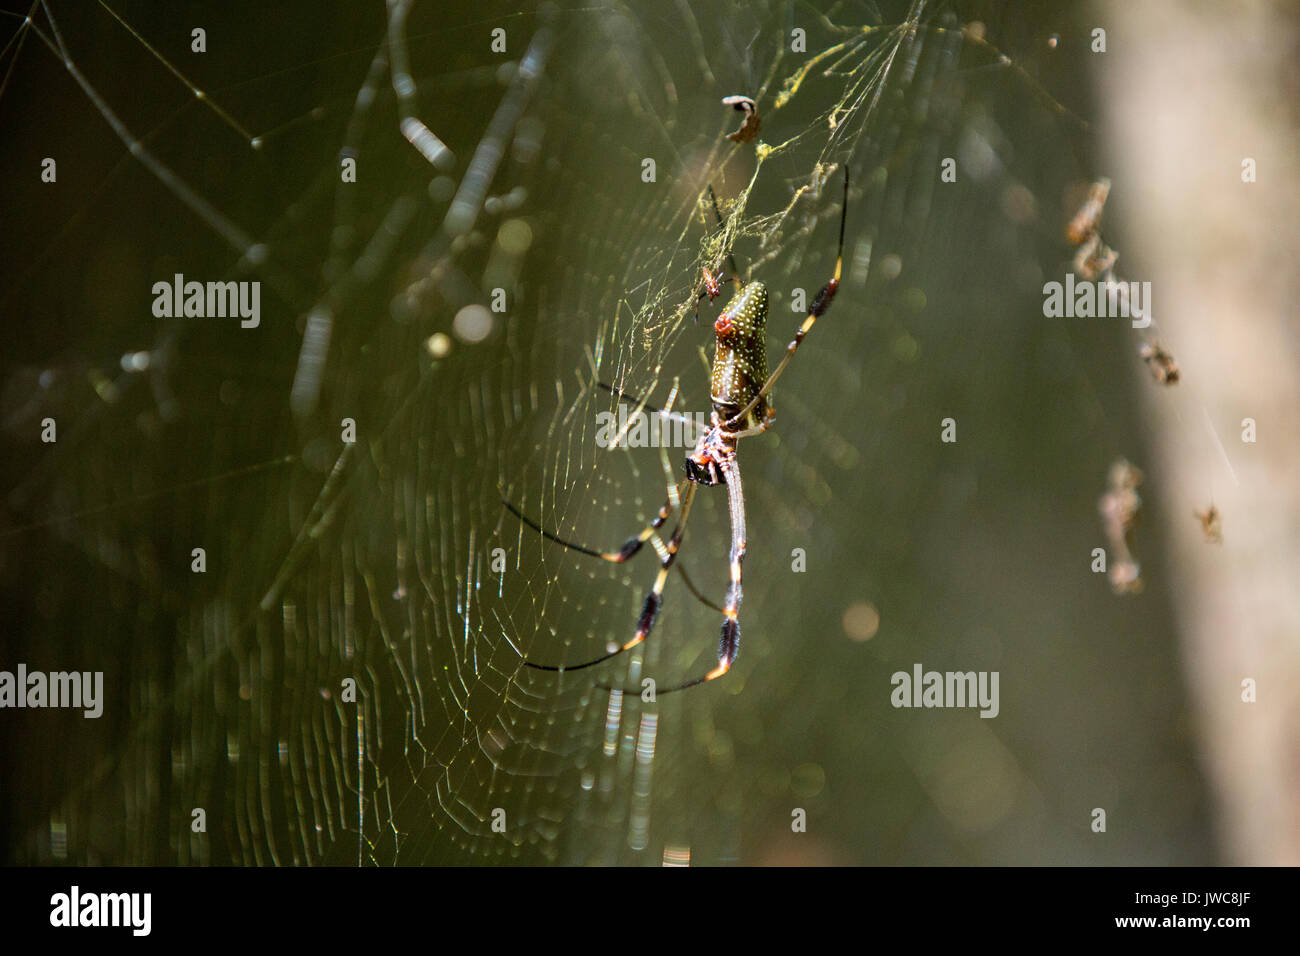 A golden-orb spider in its web. Stock Photo